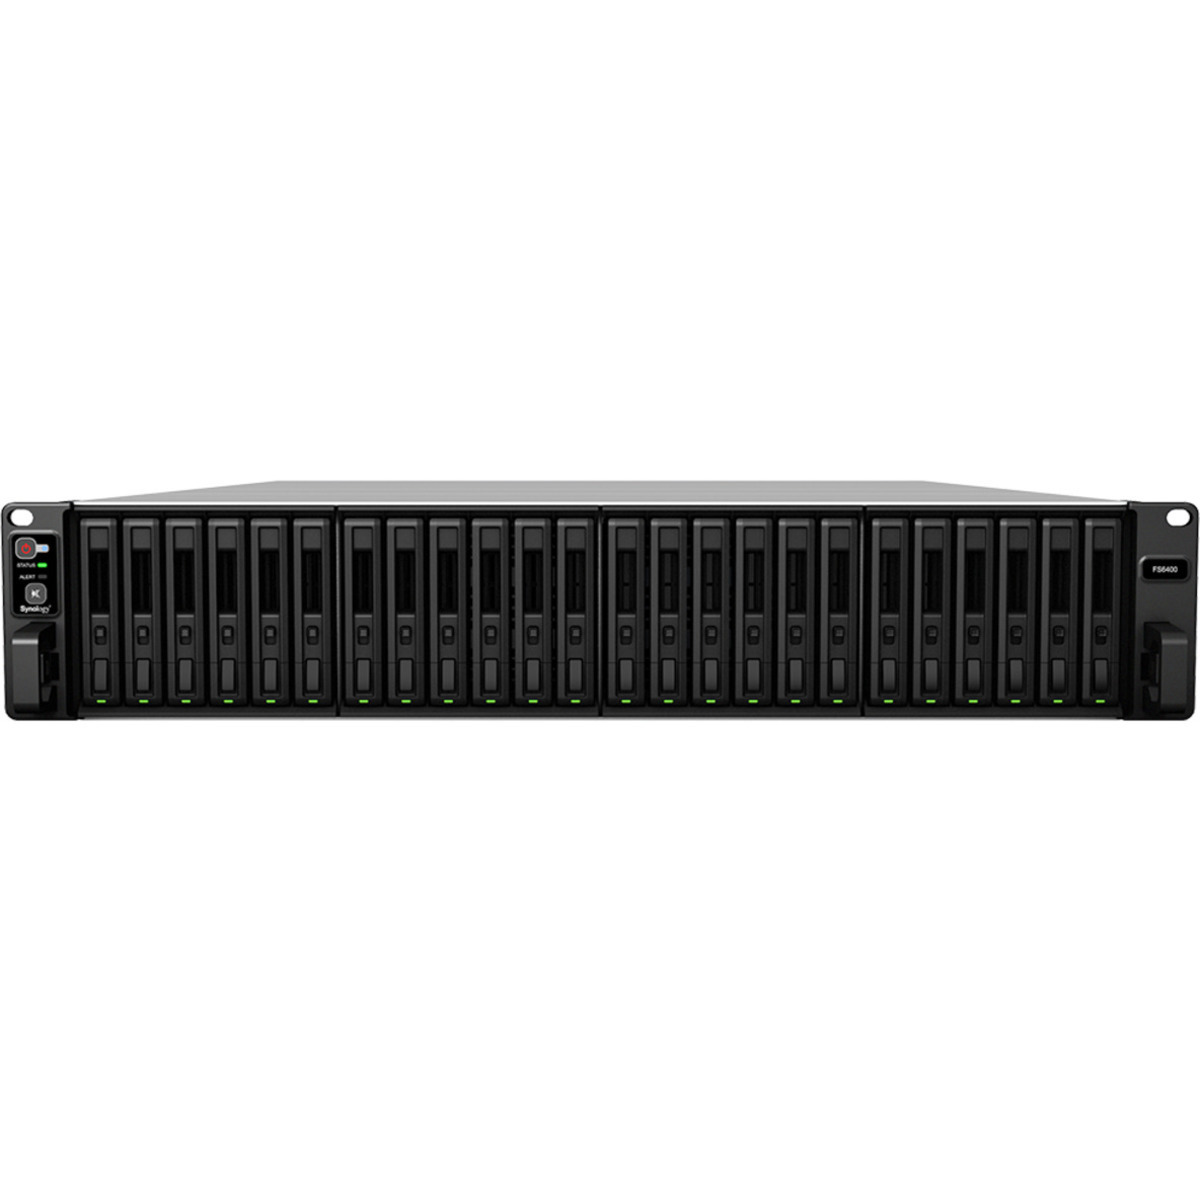 Synology FlashStation FS6400 76tb 24-Bay RackMount Large Business / Enterprise NAS - Network Attached Storage Device 19x4tb Samsung 870 QVO MZ-77Q4T0 2.5 560/530MB/s SATA 6Gb/s SSD CONSUMER Class Drives Installed - Burn-In Tested FlashStation FS6400